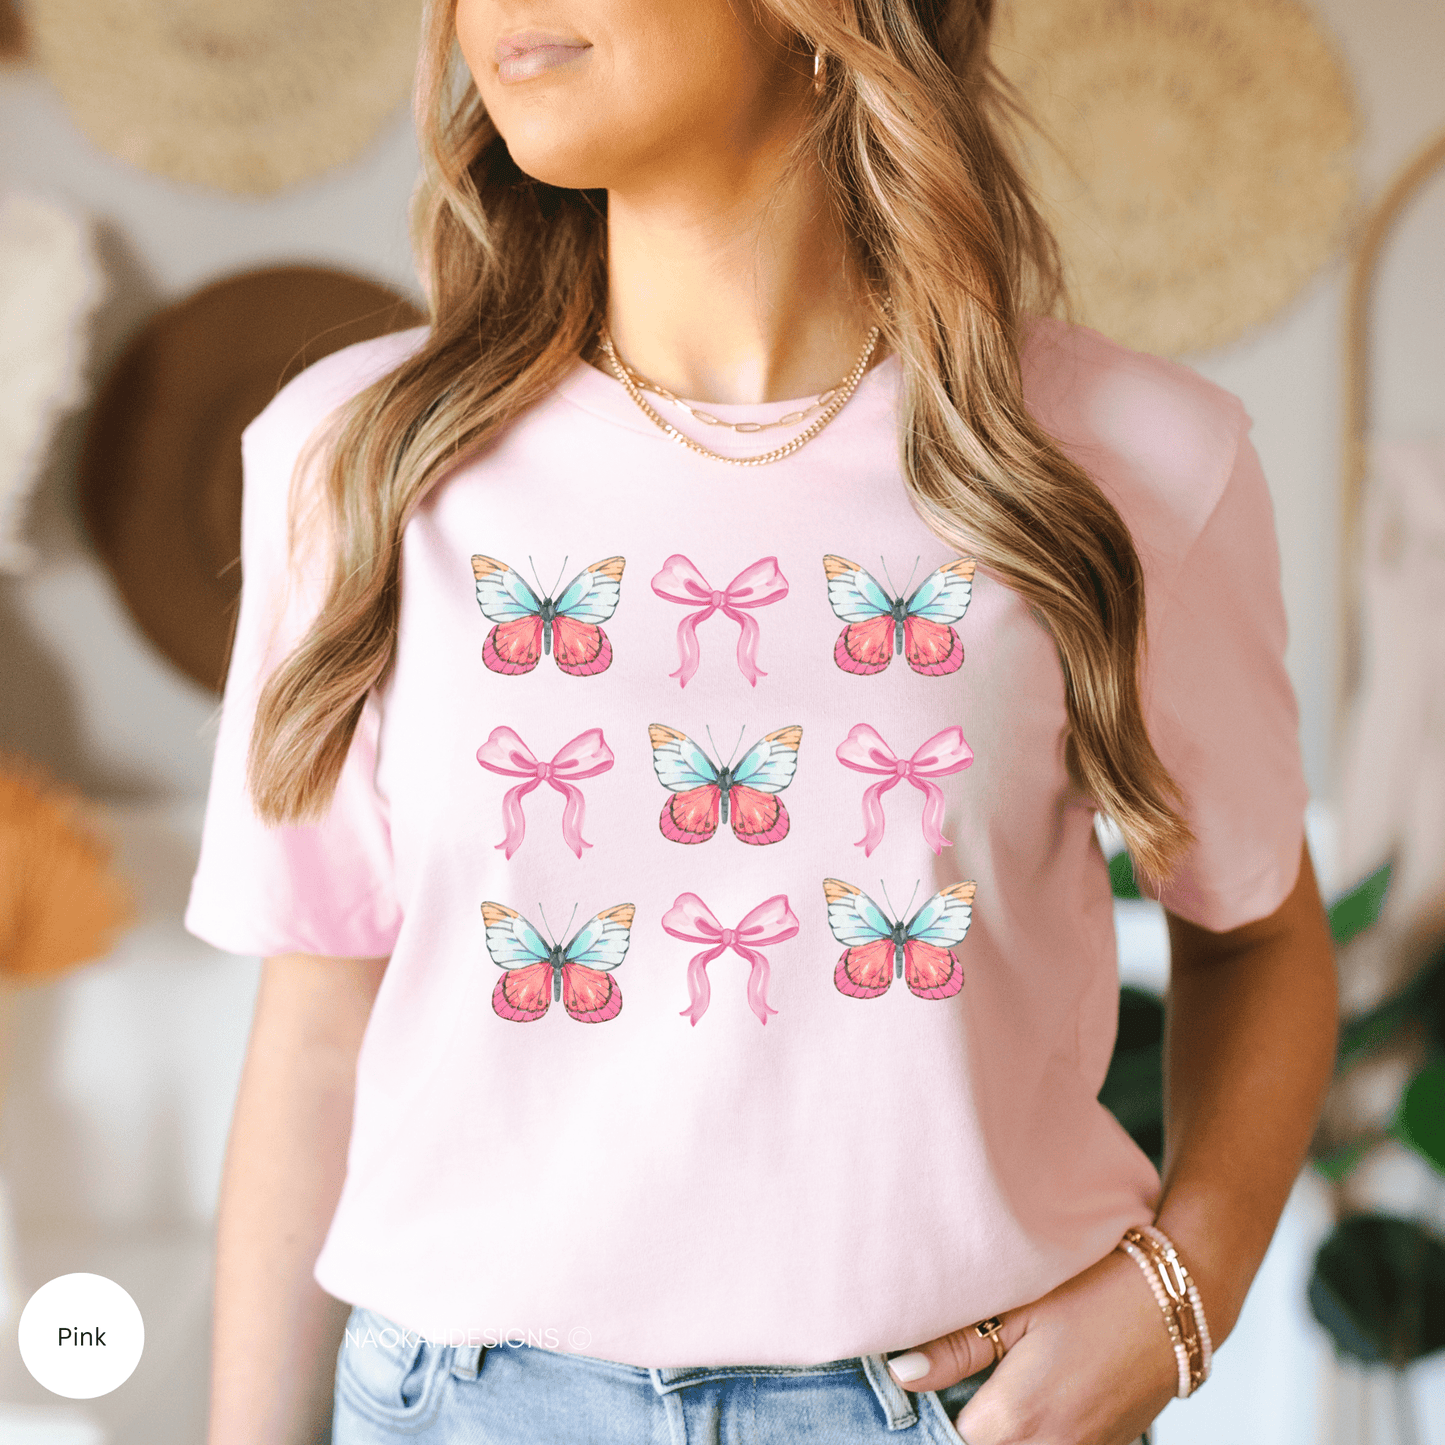 coquette butterfly and bows shirt, retro coquette aesthetic butterfly art shirt